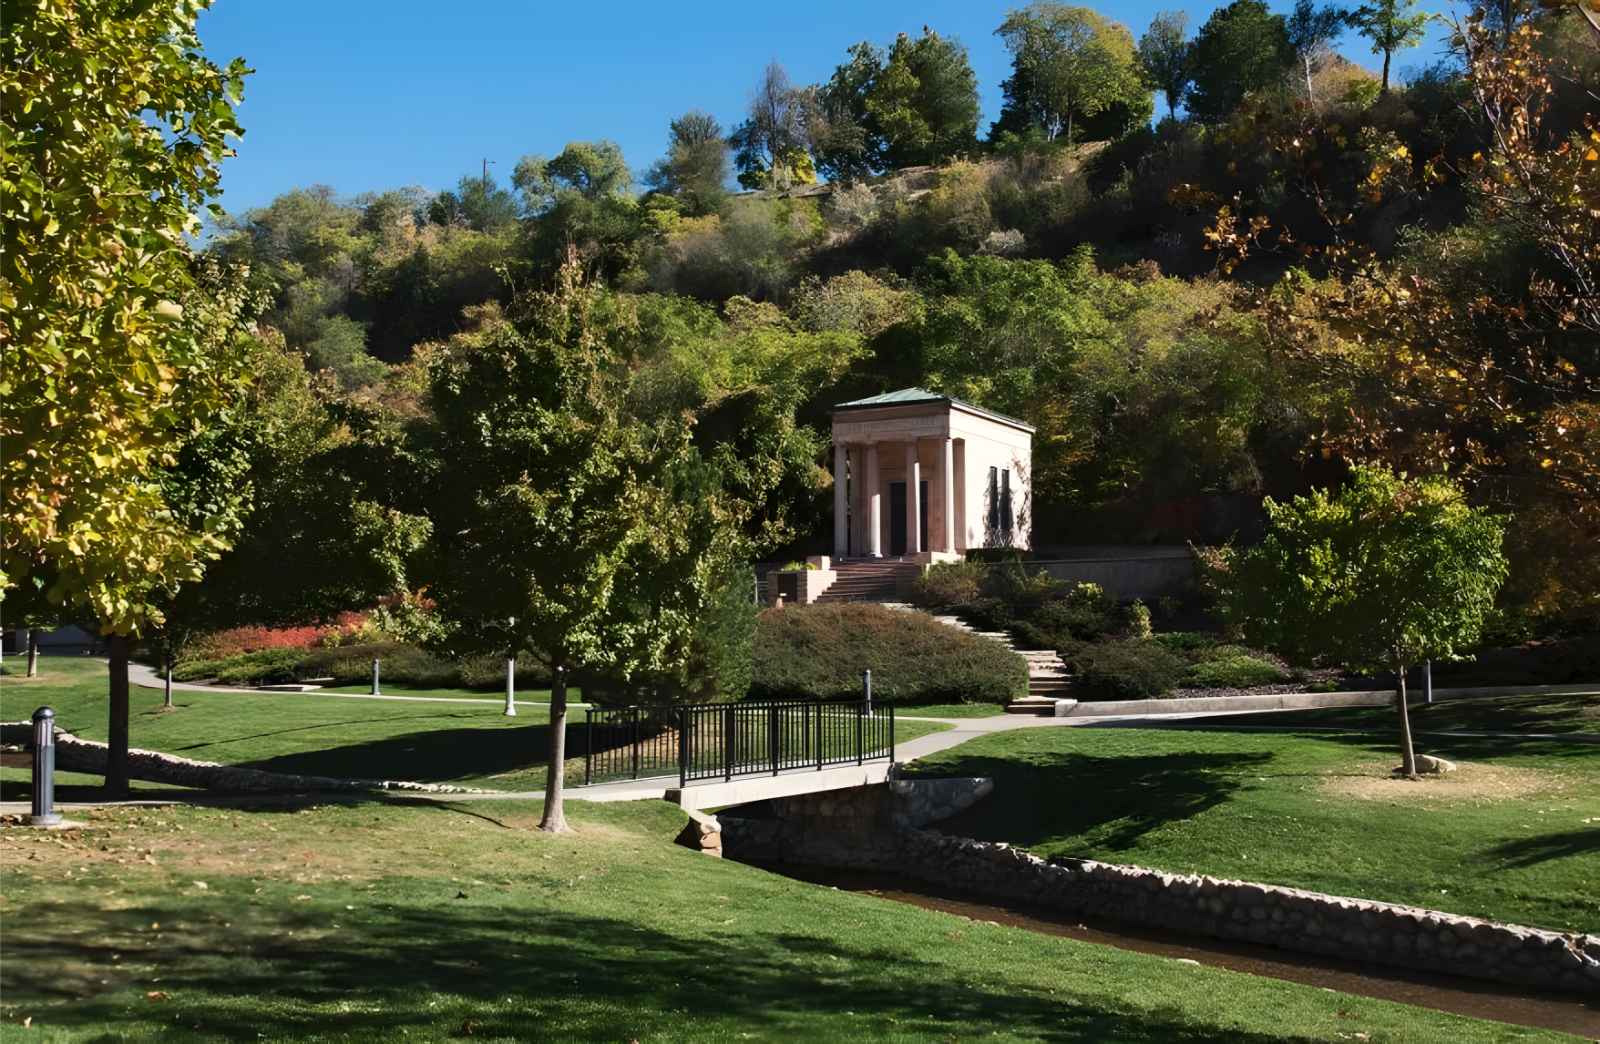 Things to do in Salt Lake City - Memory Grove Park